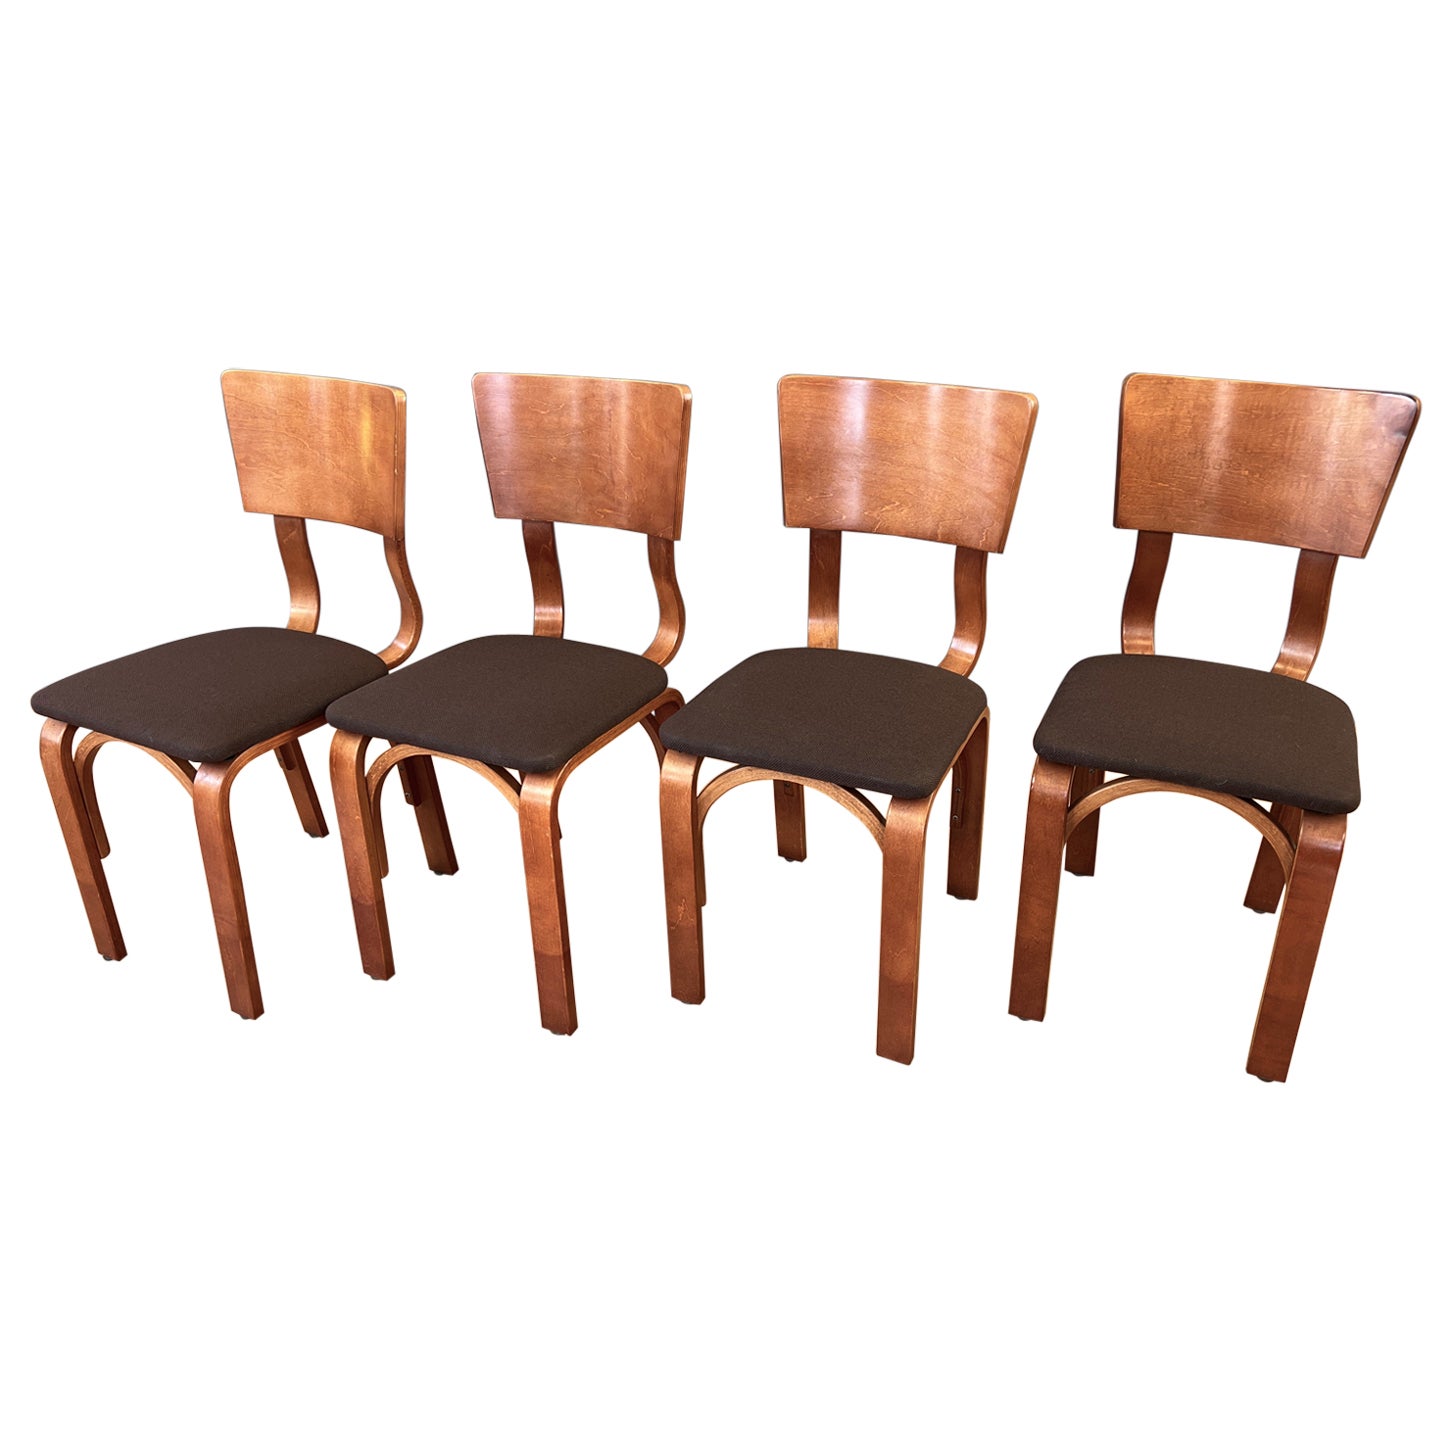 circa 1940s Set of Four Thonet Bentwood Dining Chairs